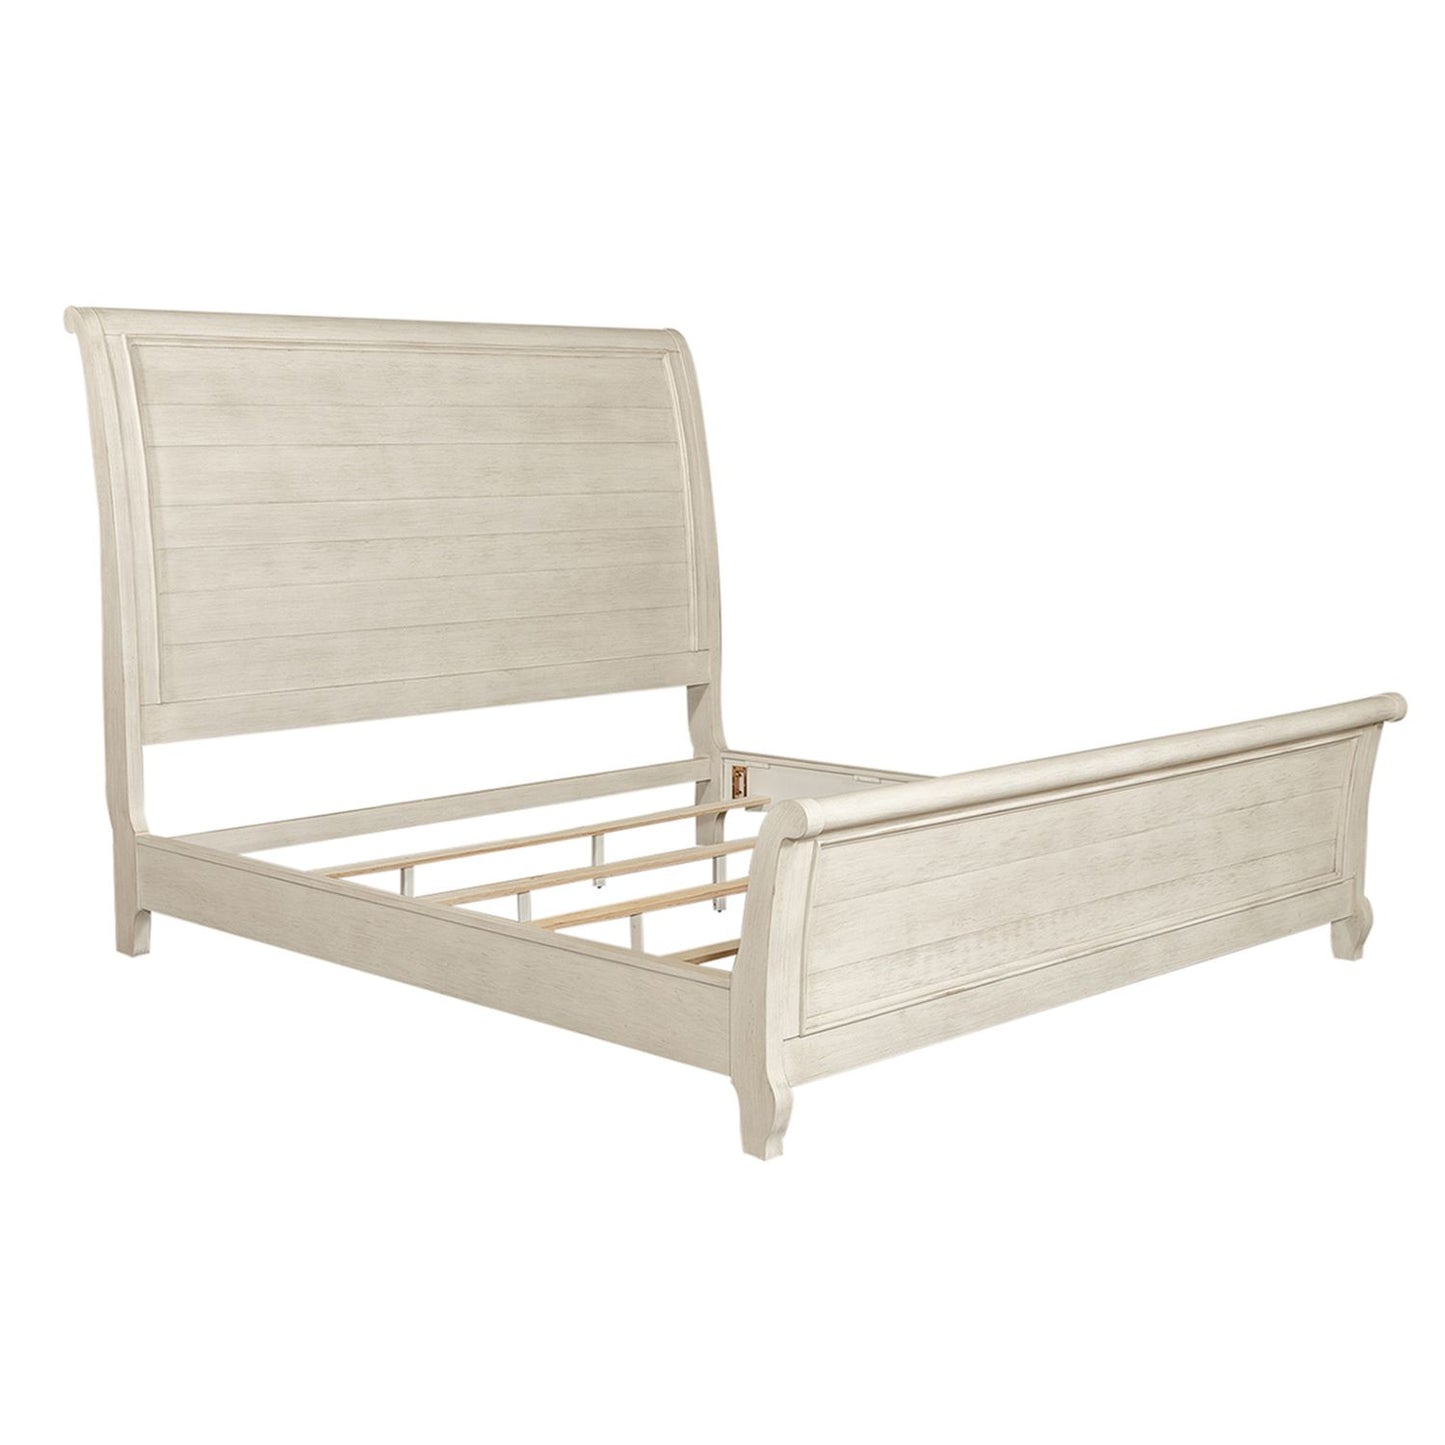 Farmhouse Reimagined - King Sleigh Bed